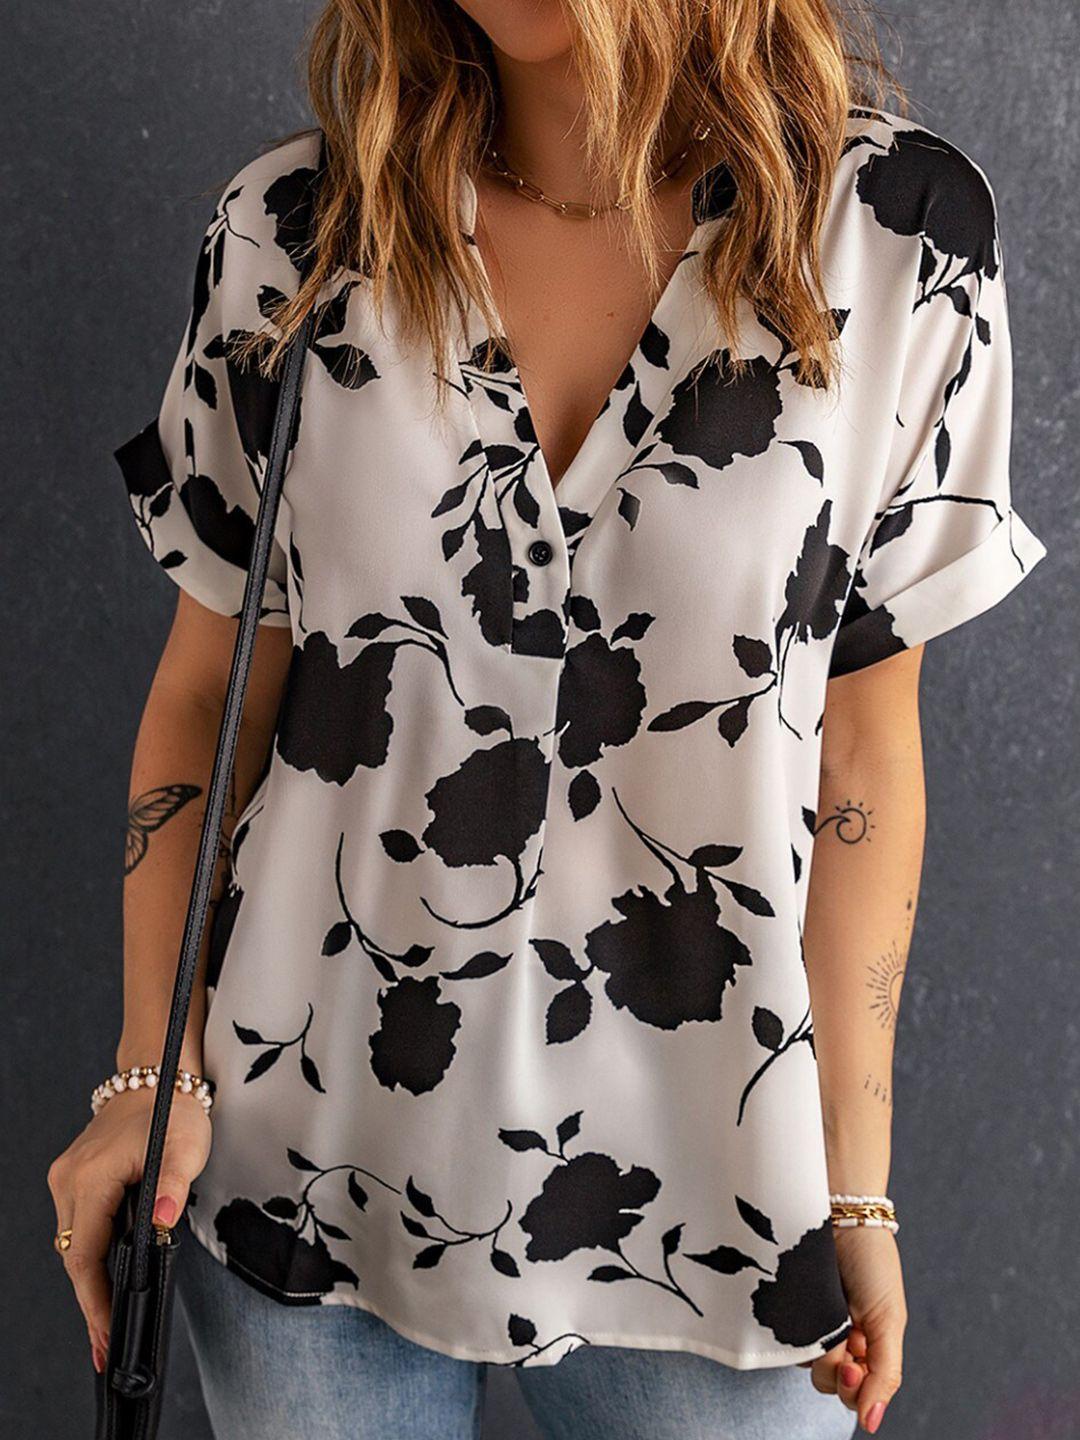 stylecast white & black floral printed shirt style top